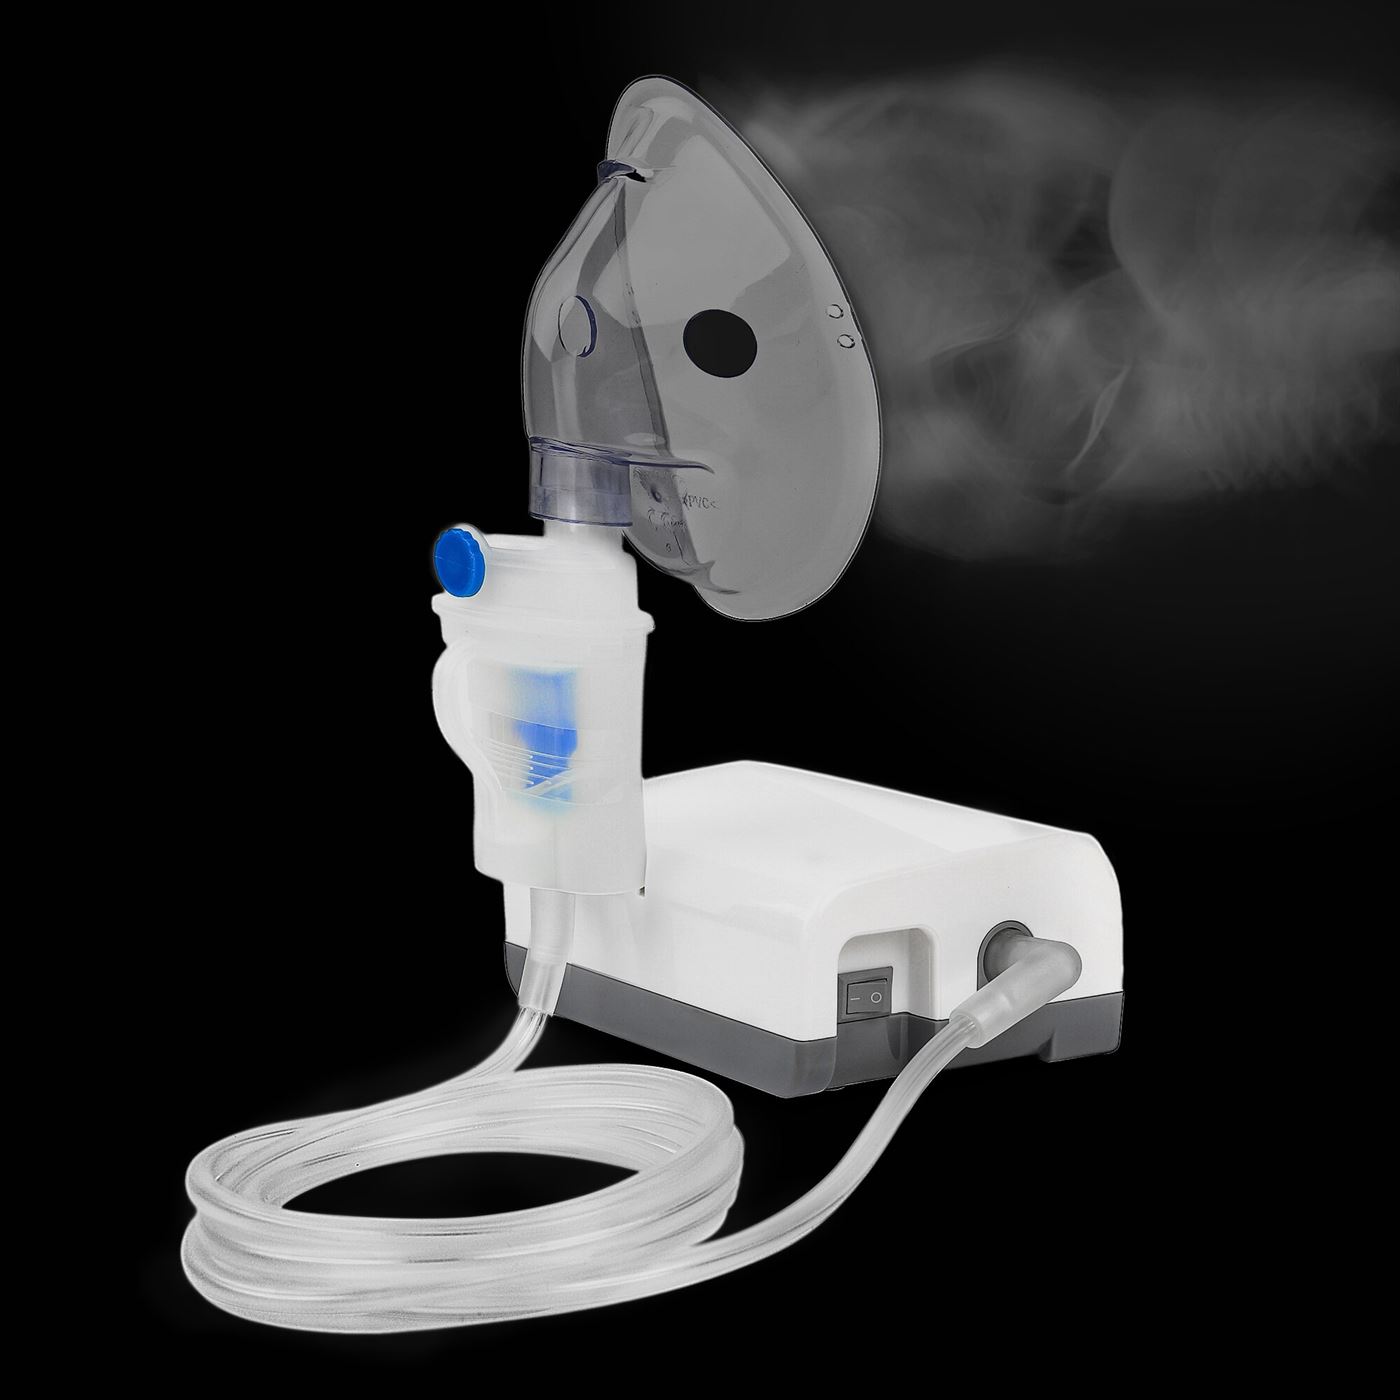 Home Ultrasonic Nebulizer Compact and Portable Inhalers Nebulizer Mist Discharge Asthma Inhaler Mini Automizer